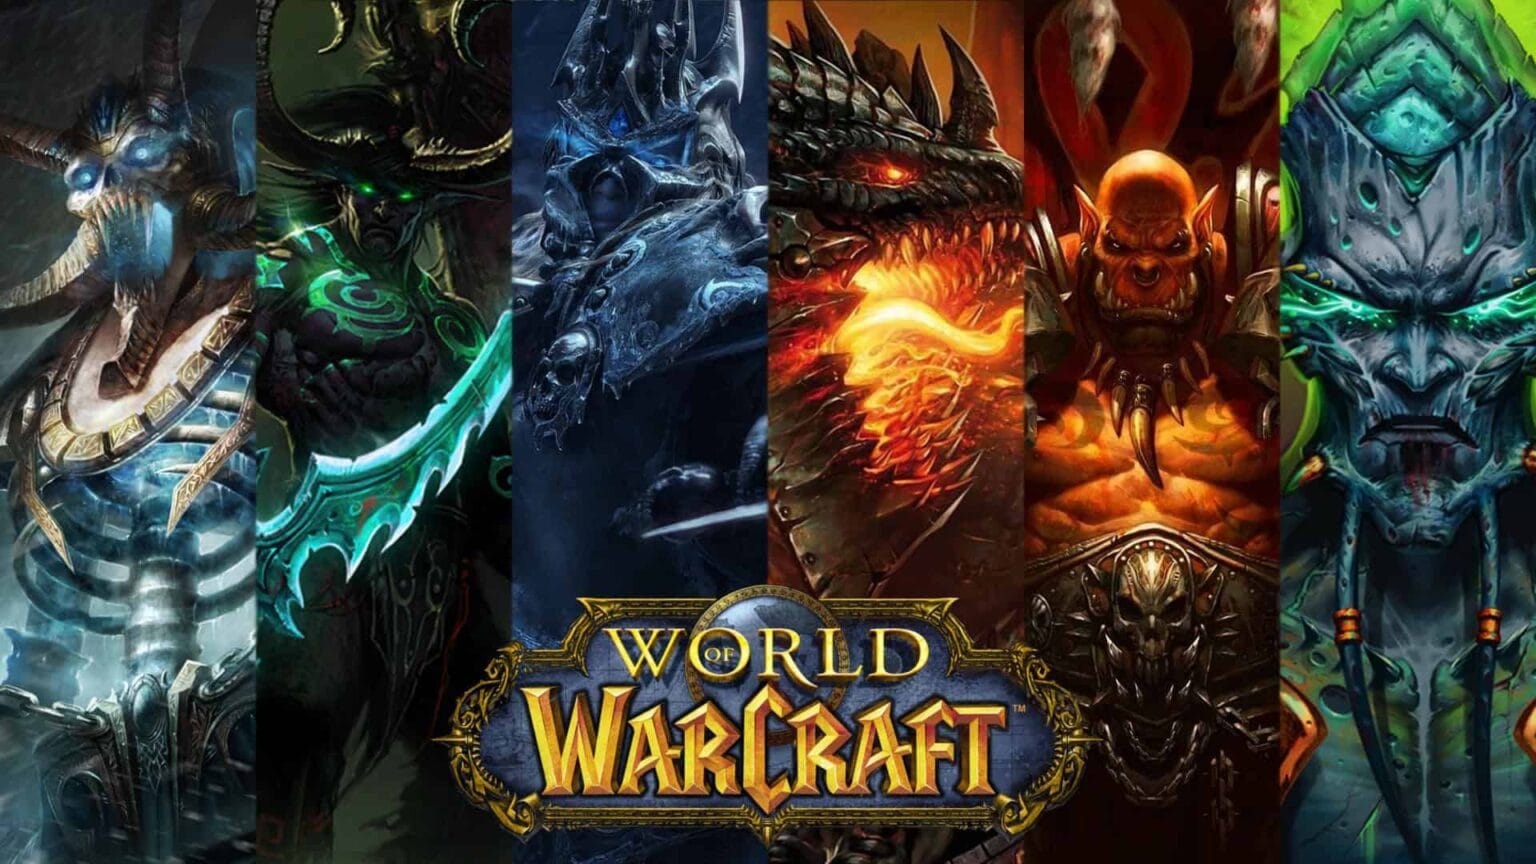 Warcraft coming to mobile